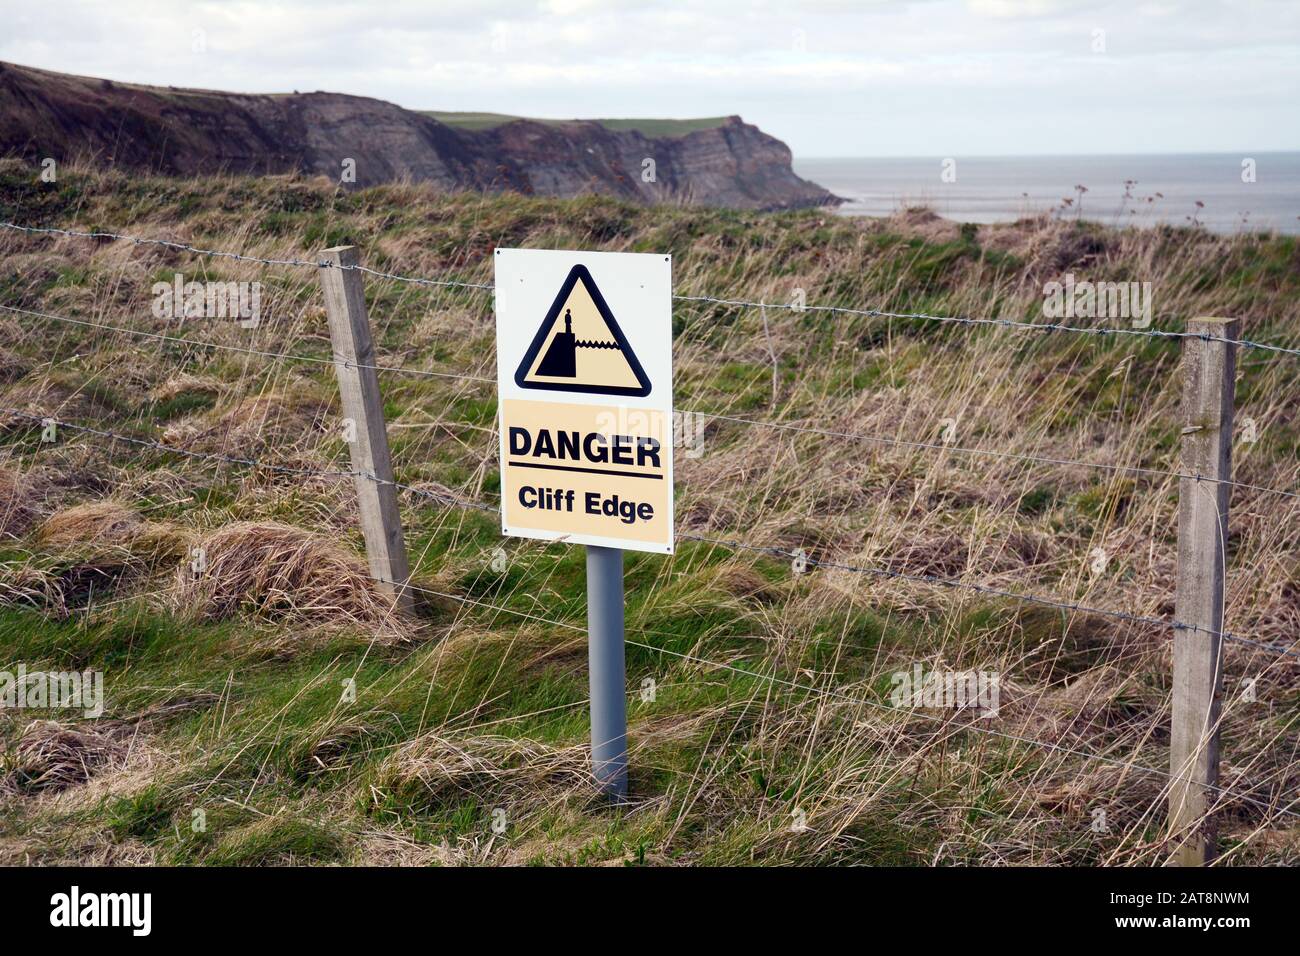 A danger sign warning of a cliff edge, along the Cleveland Way, a hiking trail in North York Moors National Park, Yorkshire, England, United Kingdom. Stock Photo